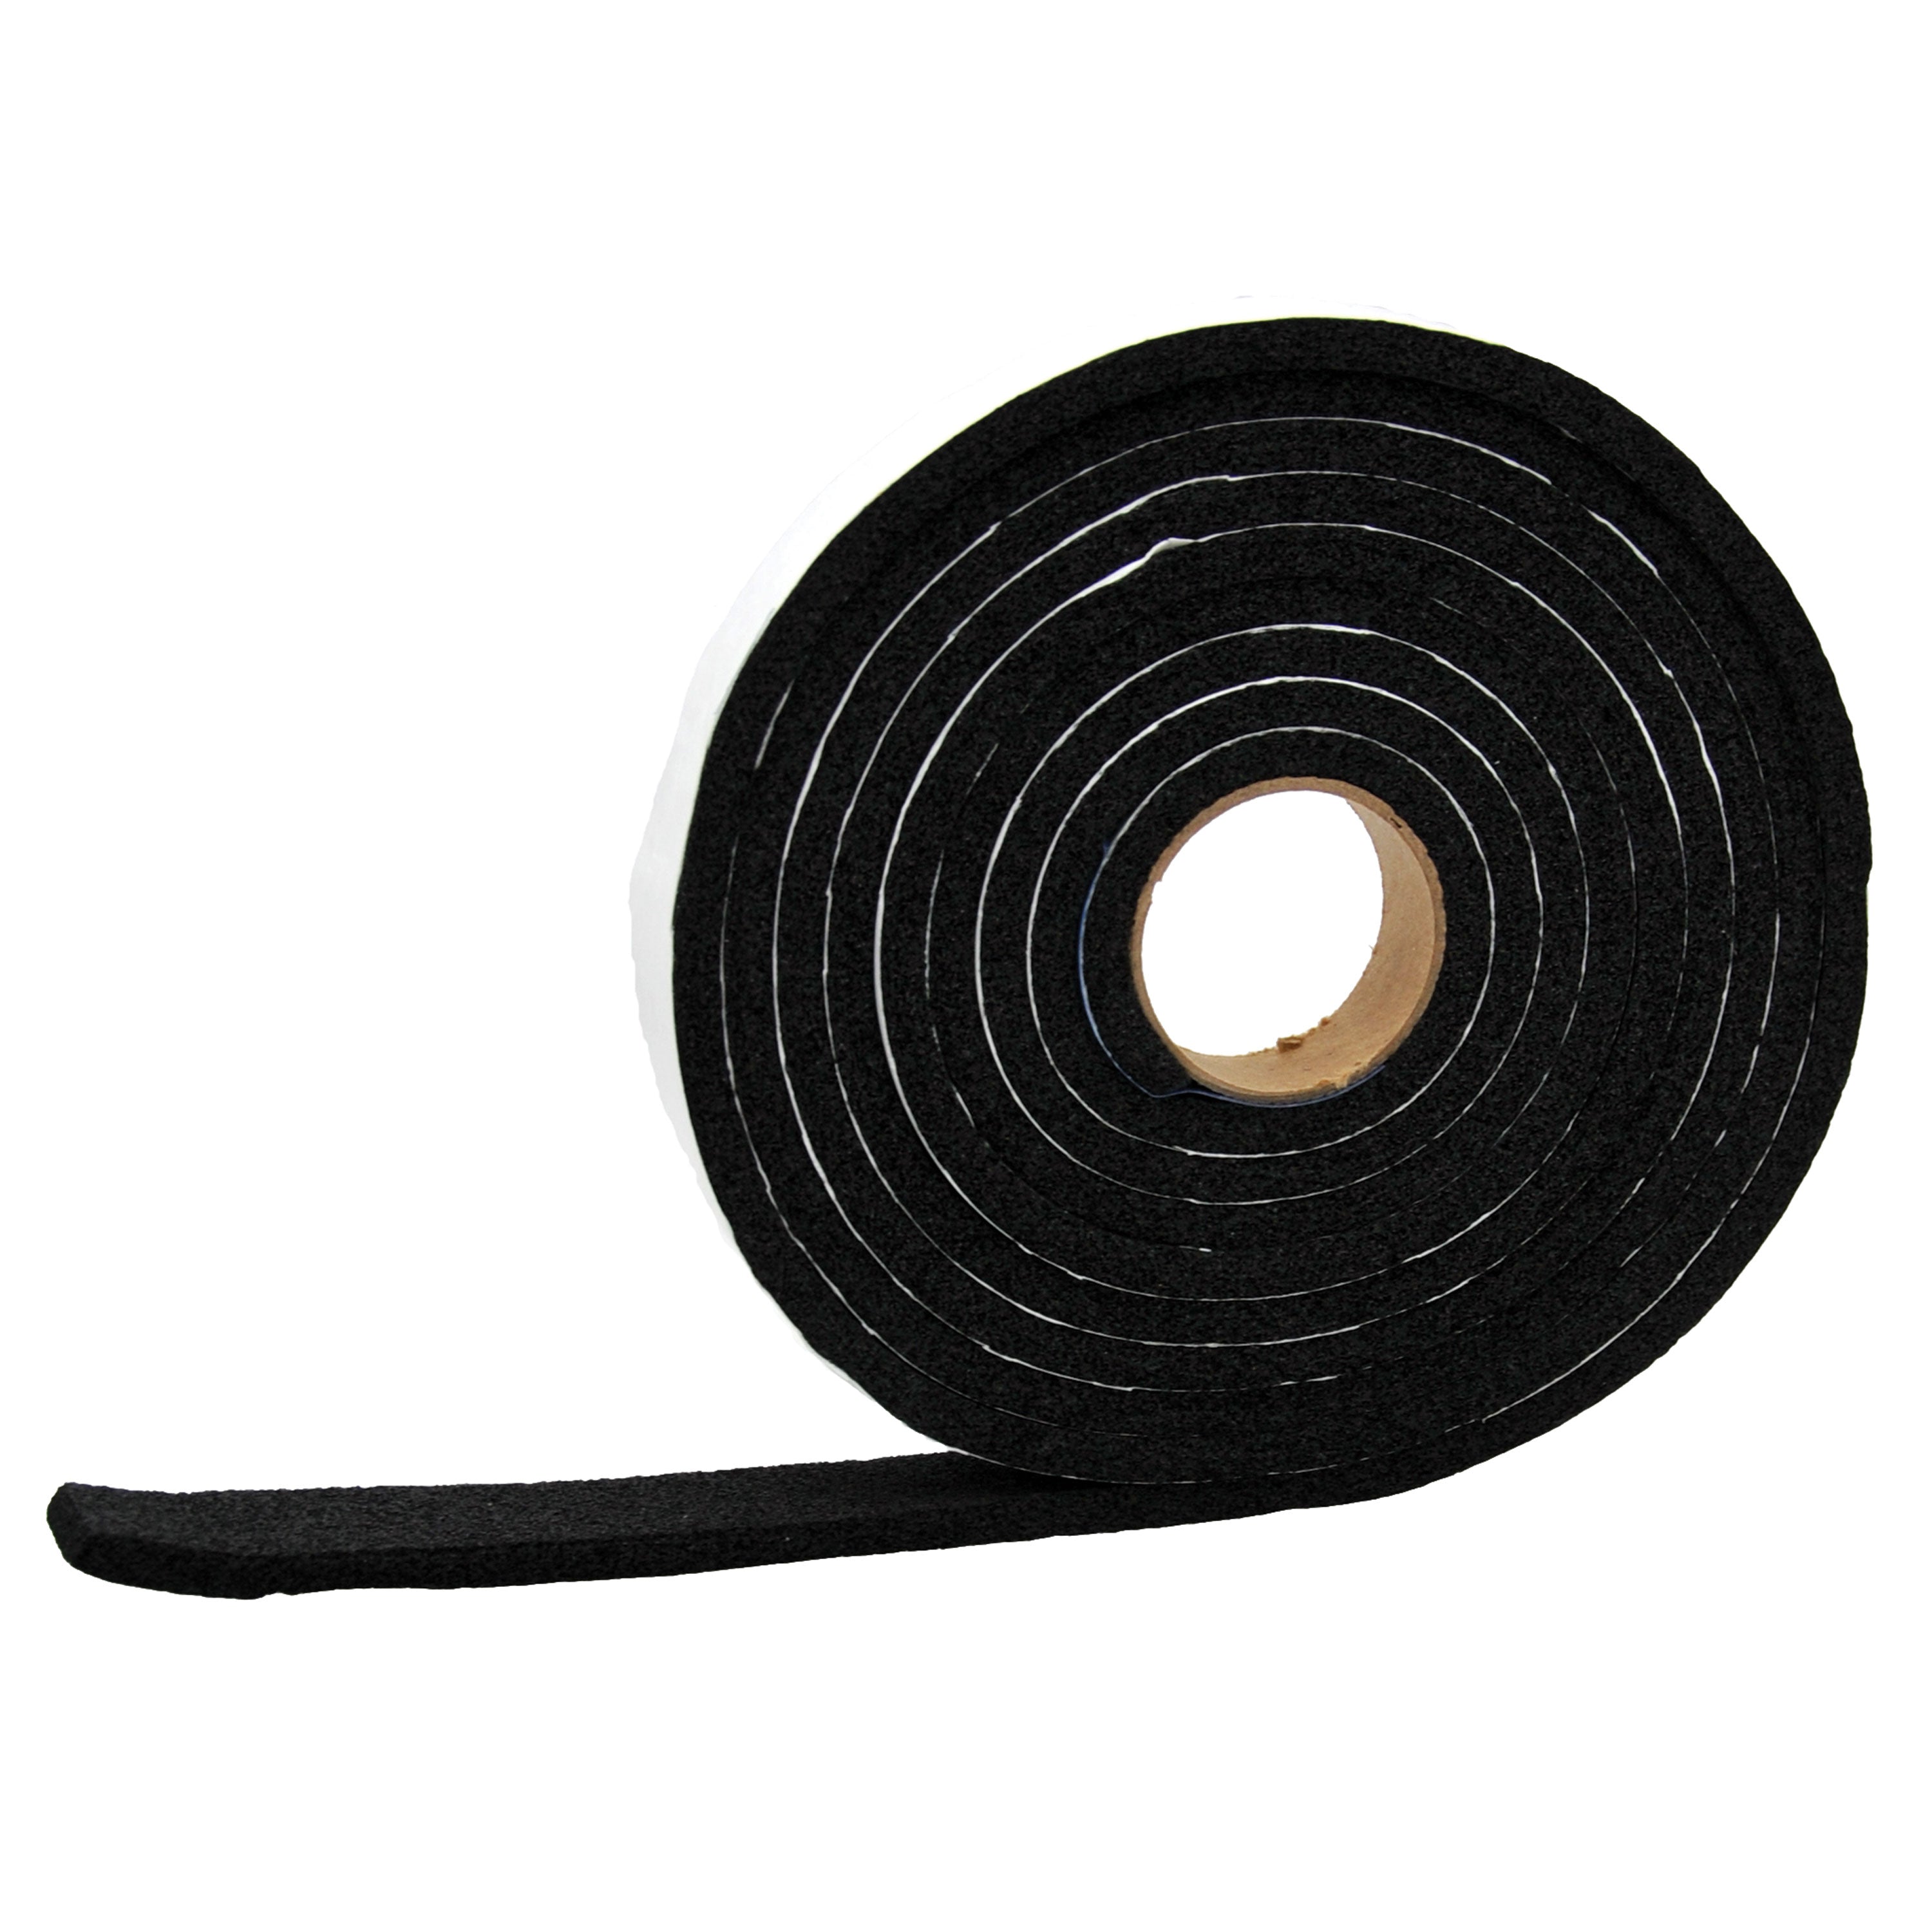 AP Products 018-5163450 Black Weather Stripping Tape - 5/16" x 3/4" x 50'